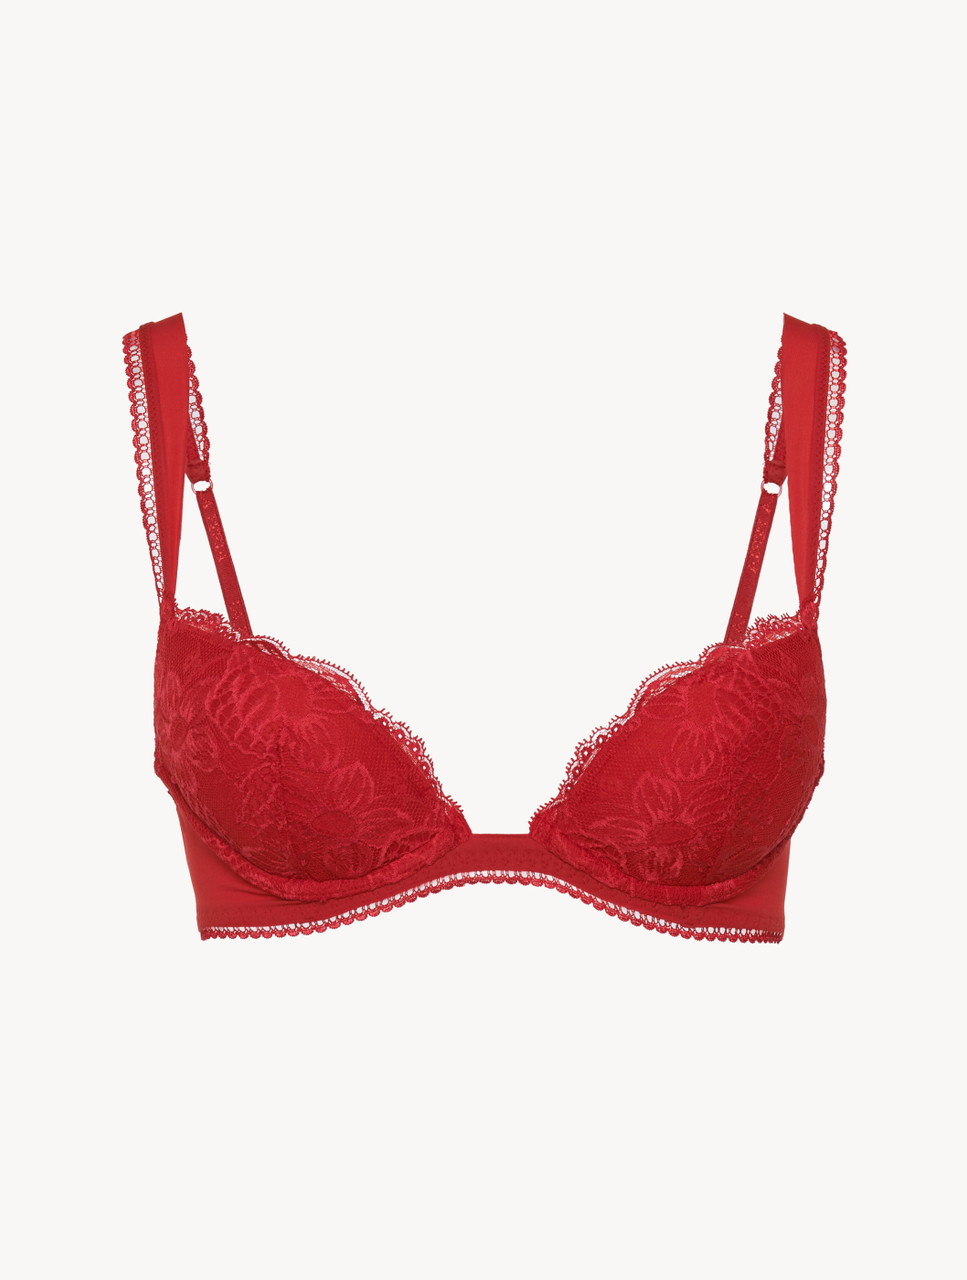 Push-up bra in garnet Lycra with Leavers lace